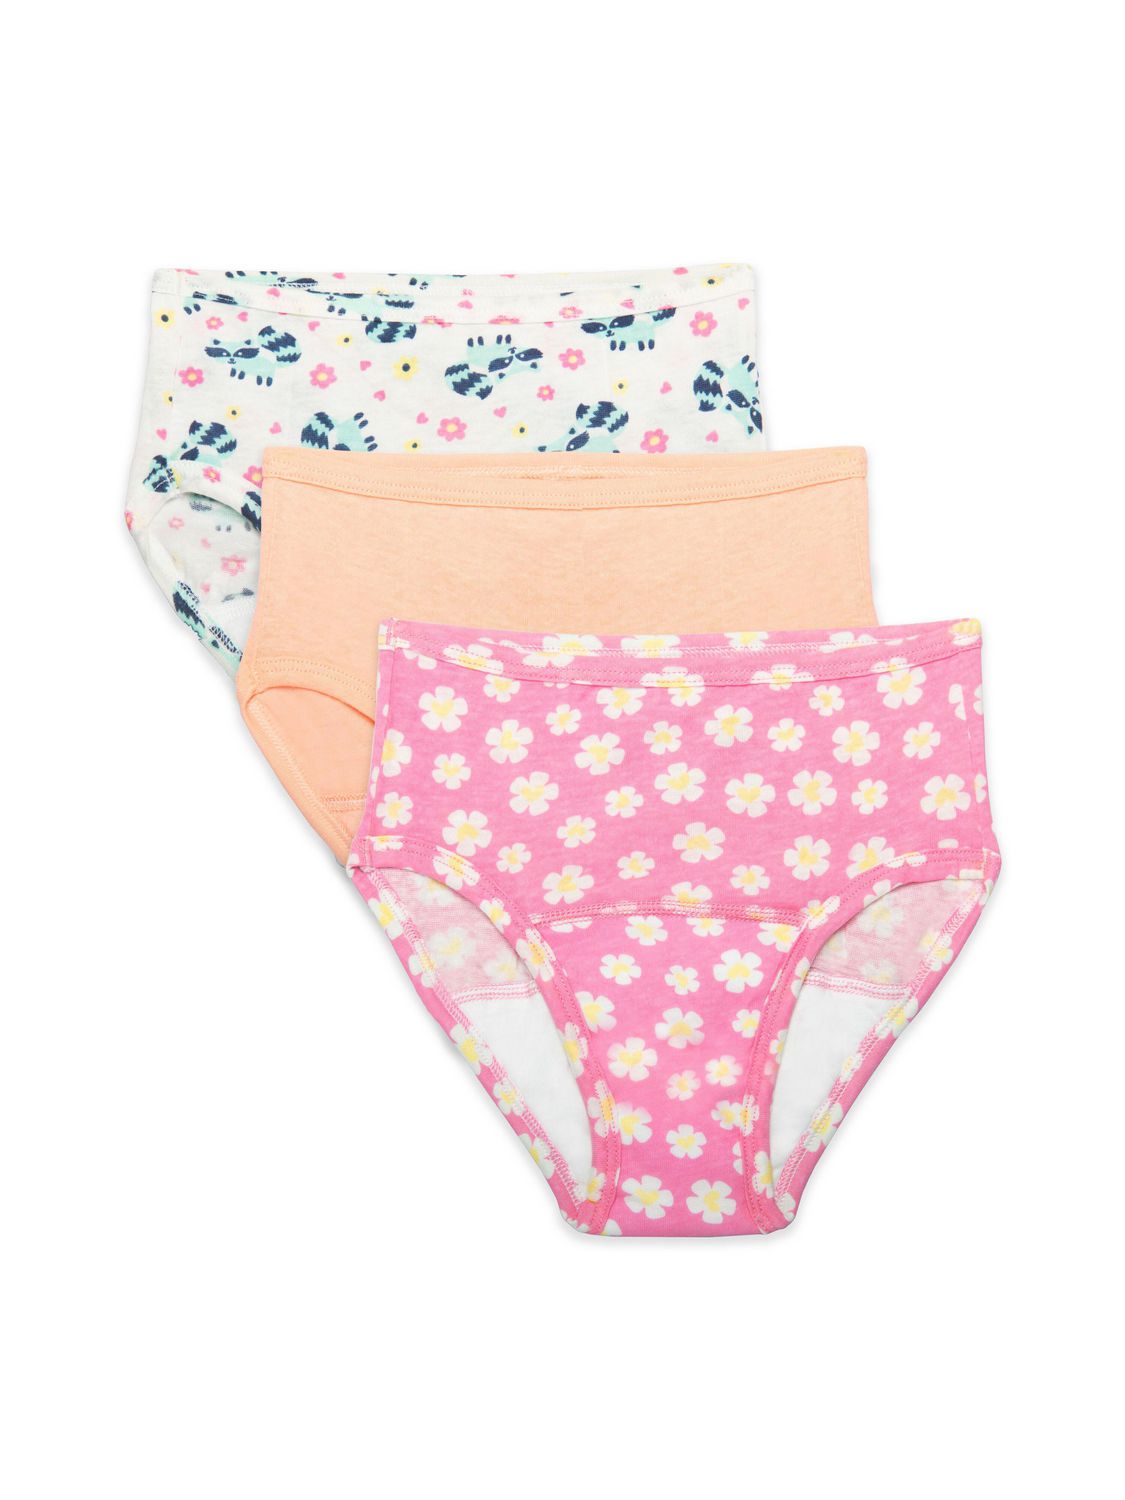 Girls' Potty Training Underwear, 78 Diapers - Fry's Food Stores